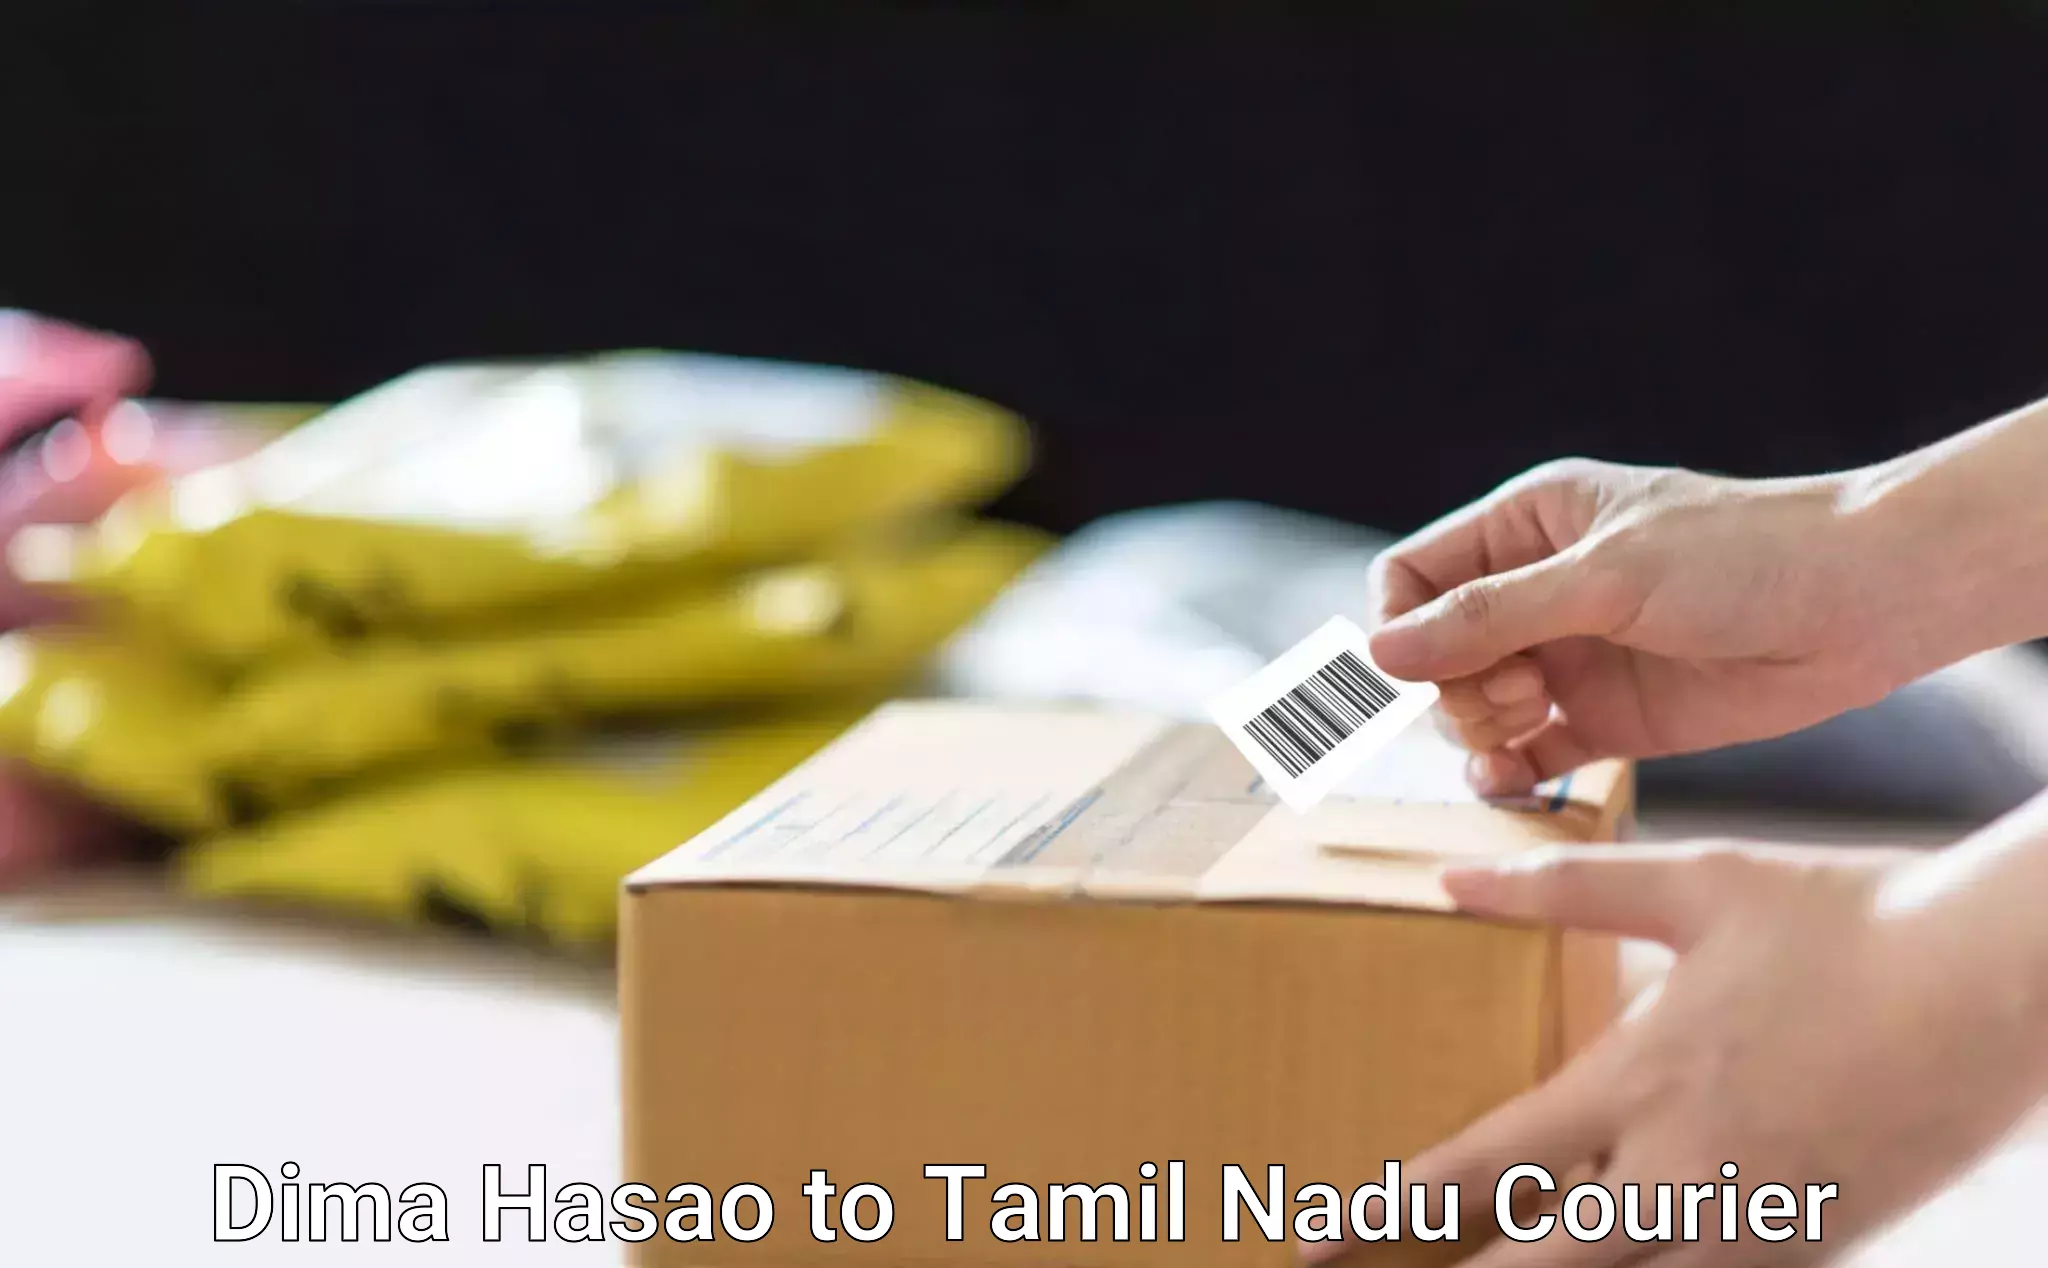 Nationwide parcel services Dima Hasao to Ennore Port Chennai